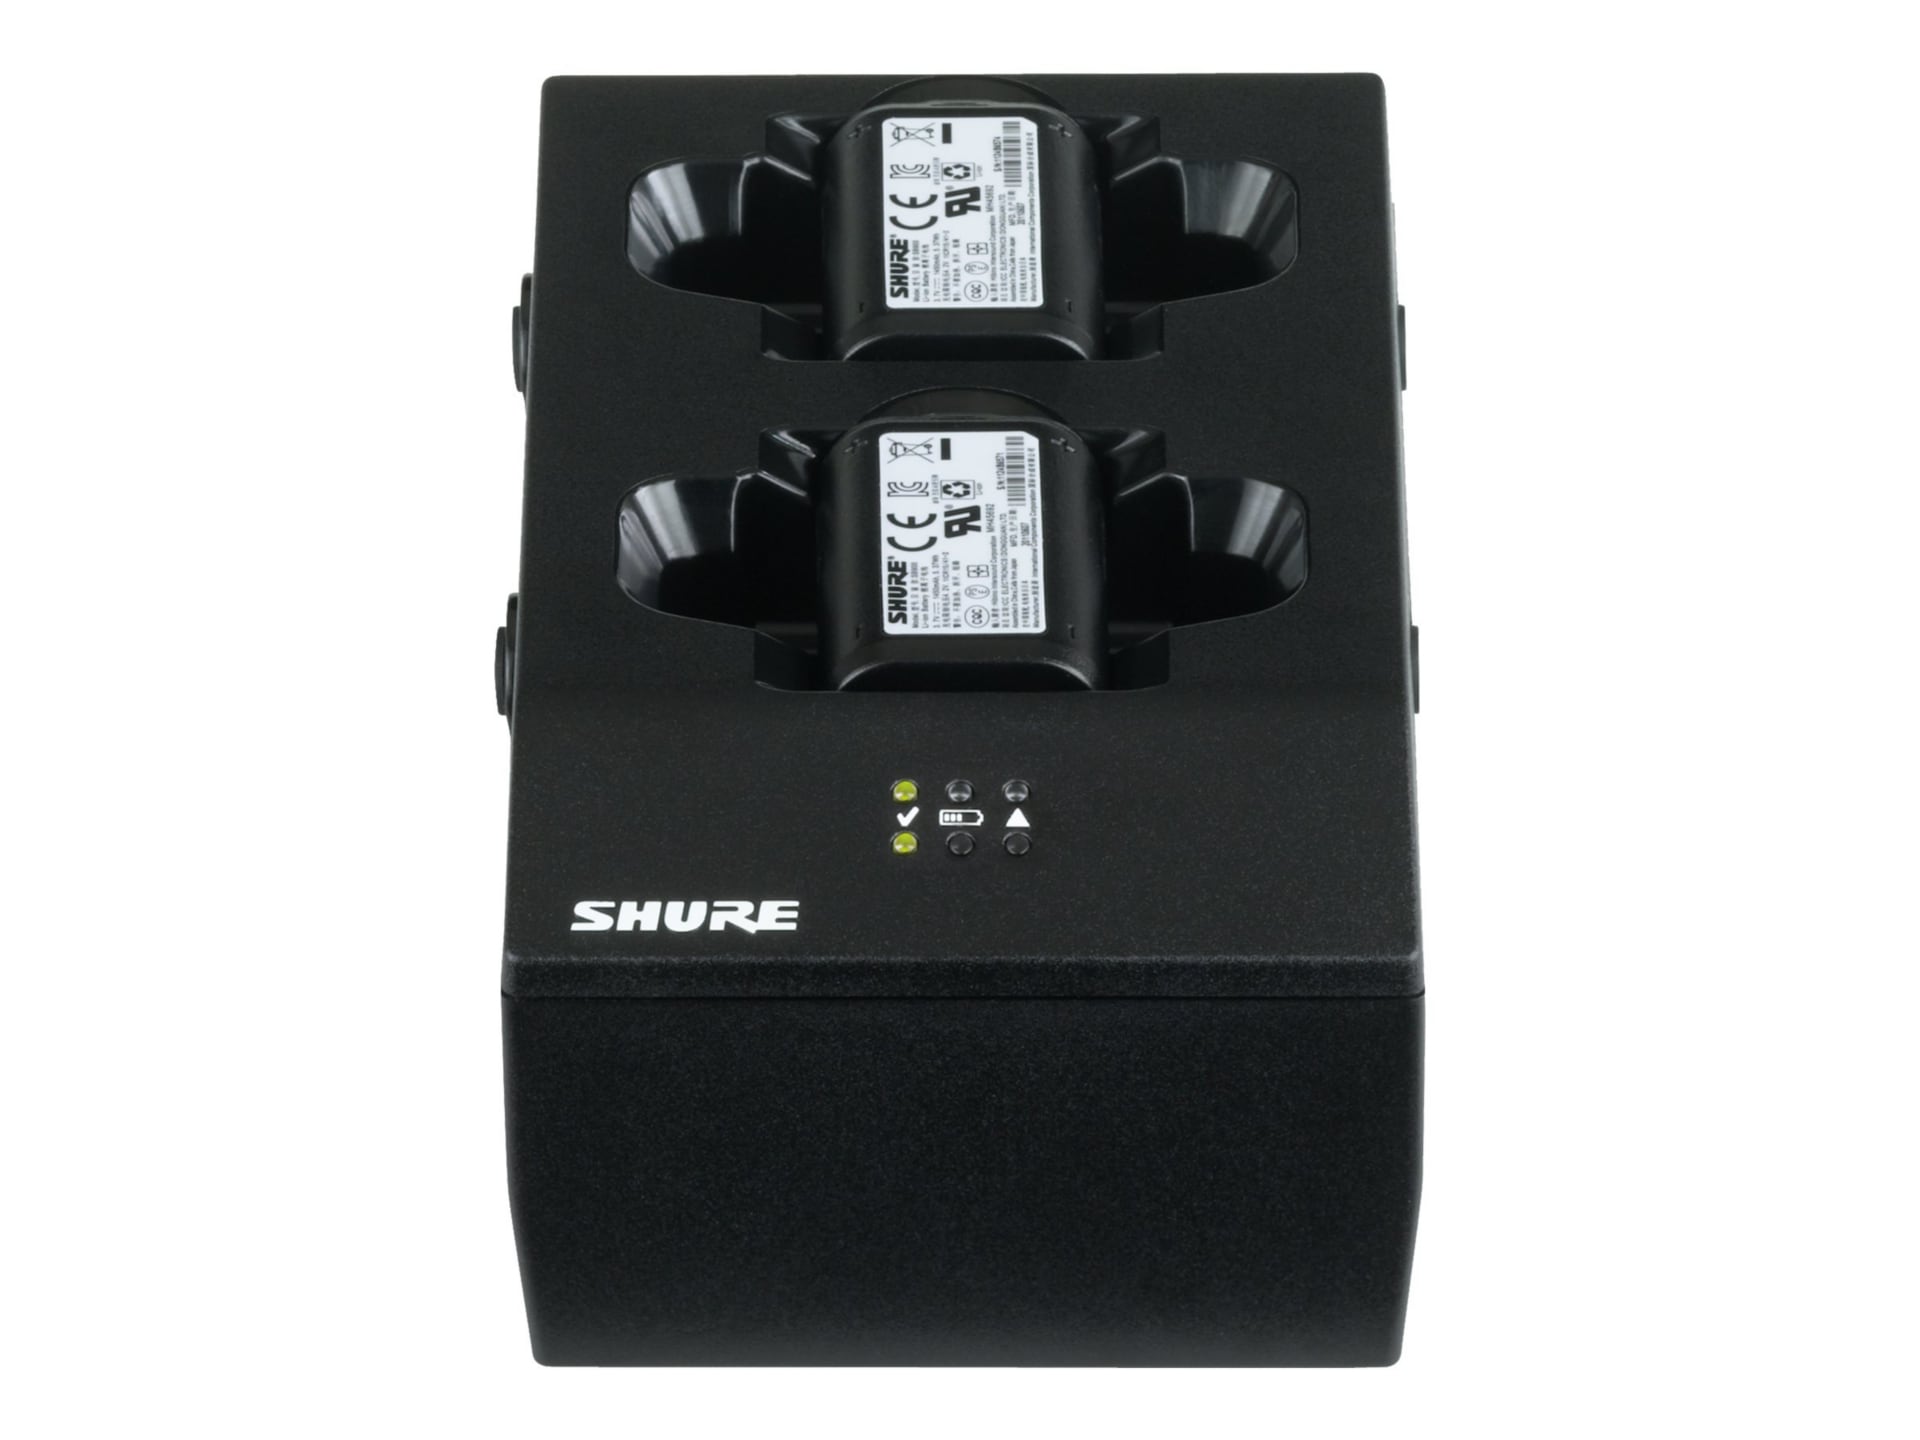 Shure SBC200 charging stand - + AC power adapter